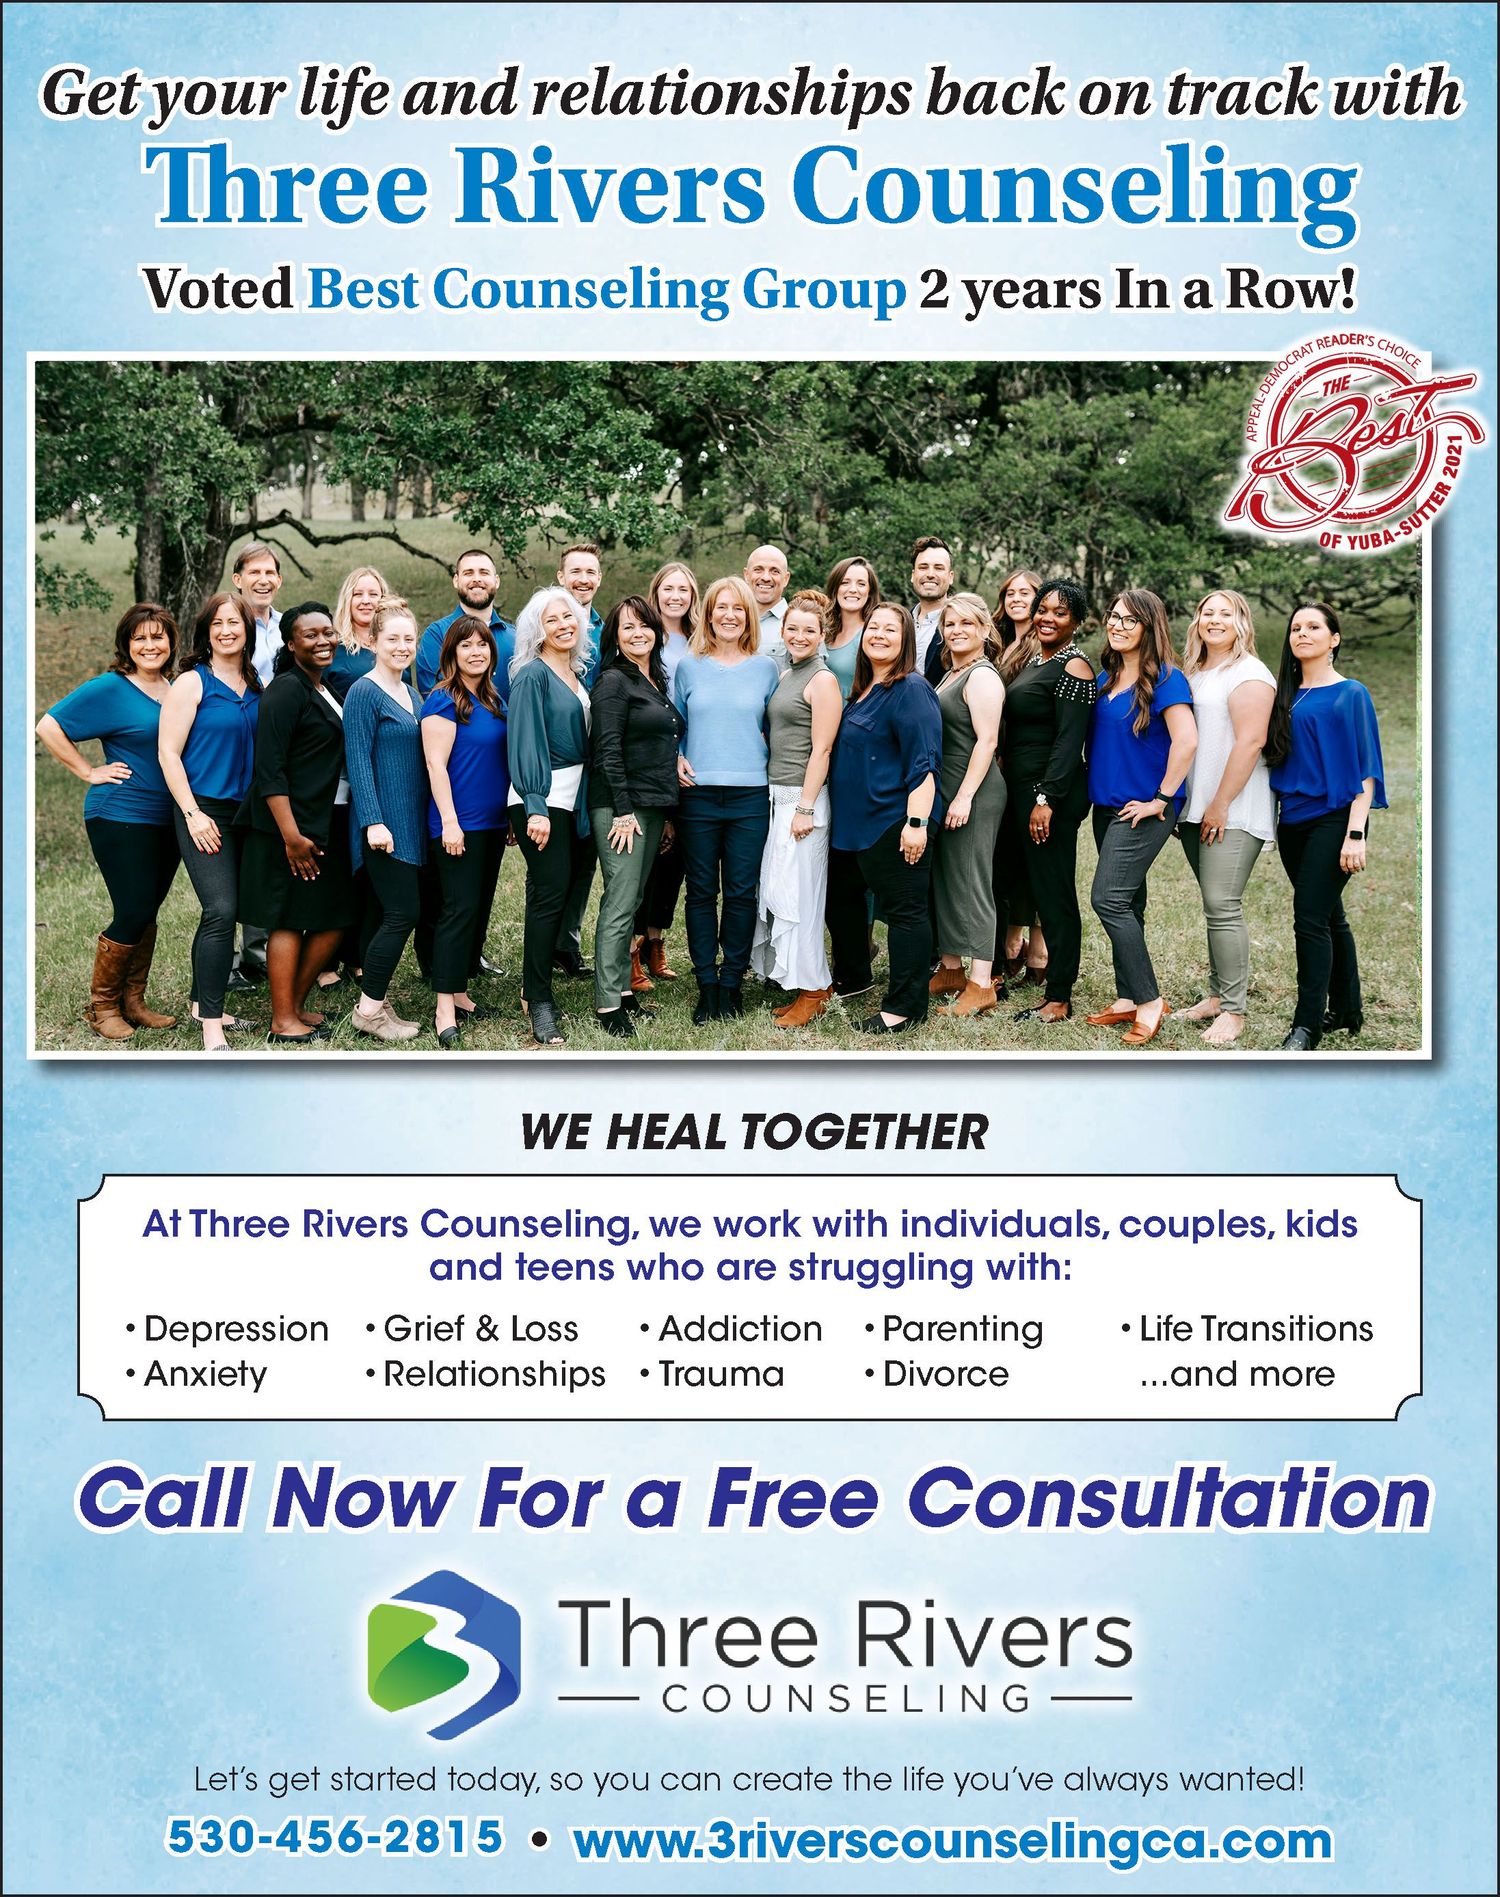 Gallery Photo of My Counseling Group was voted BEST in Yuba-Sutter & I was also voted BEST Therapist again. I am honored & grateful to continue serving our community.